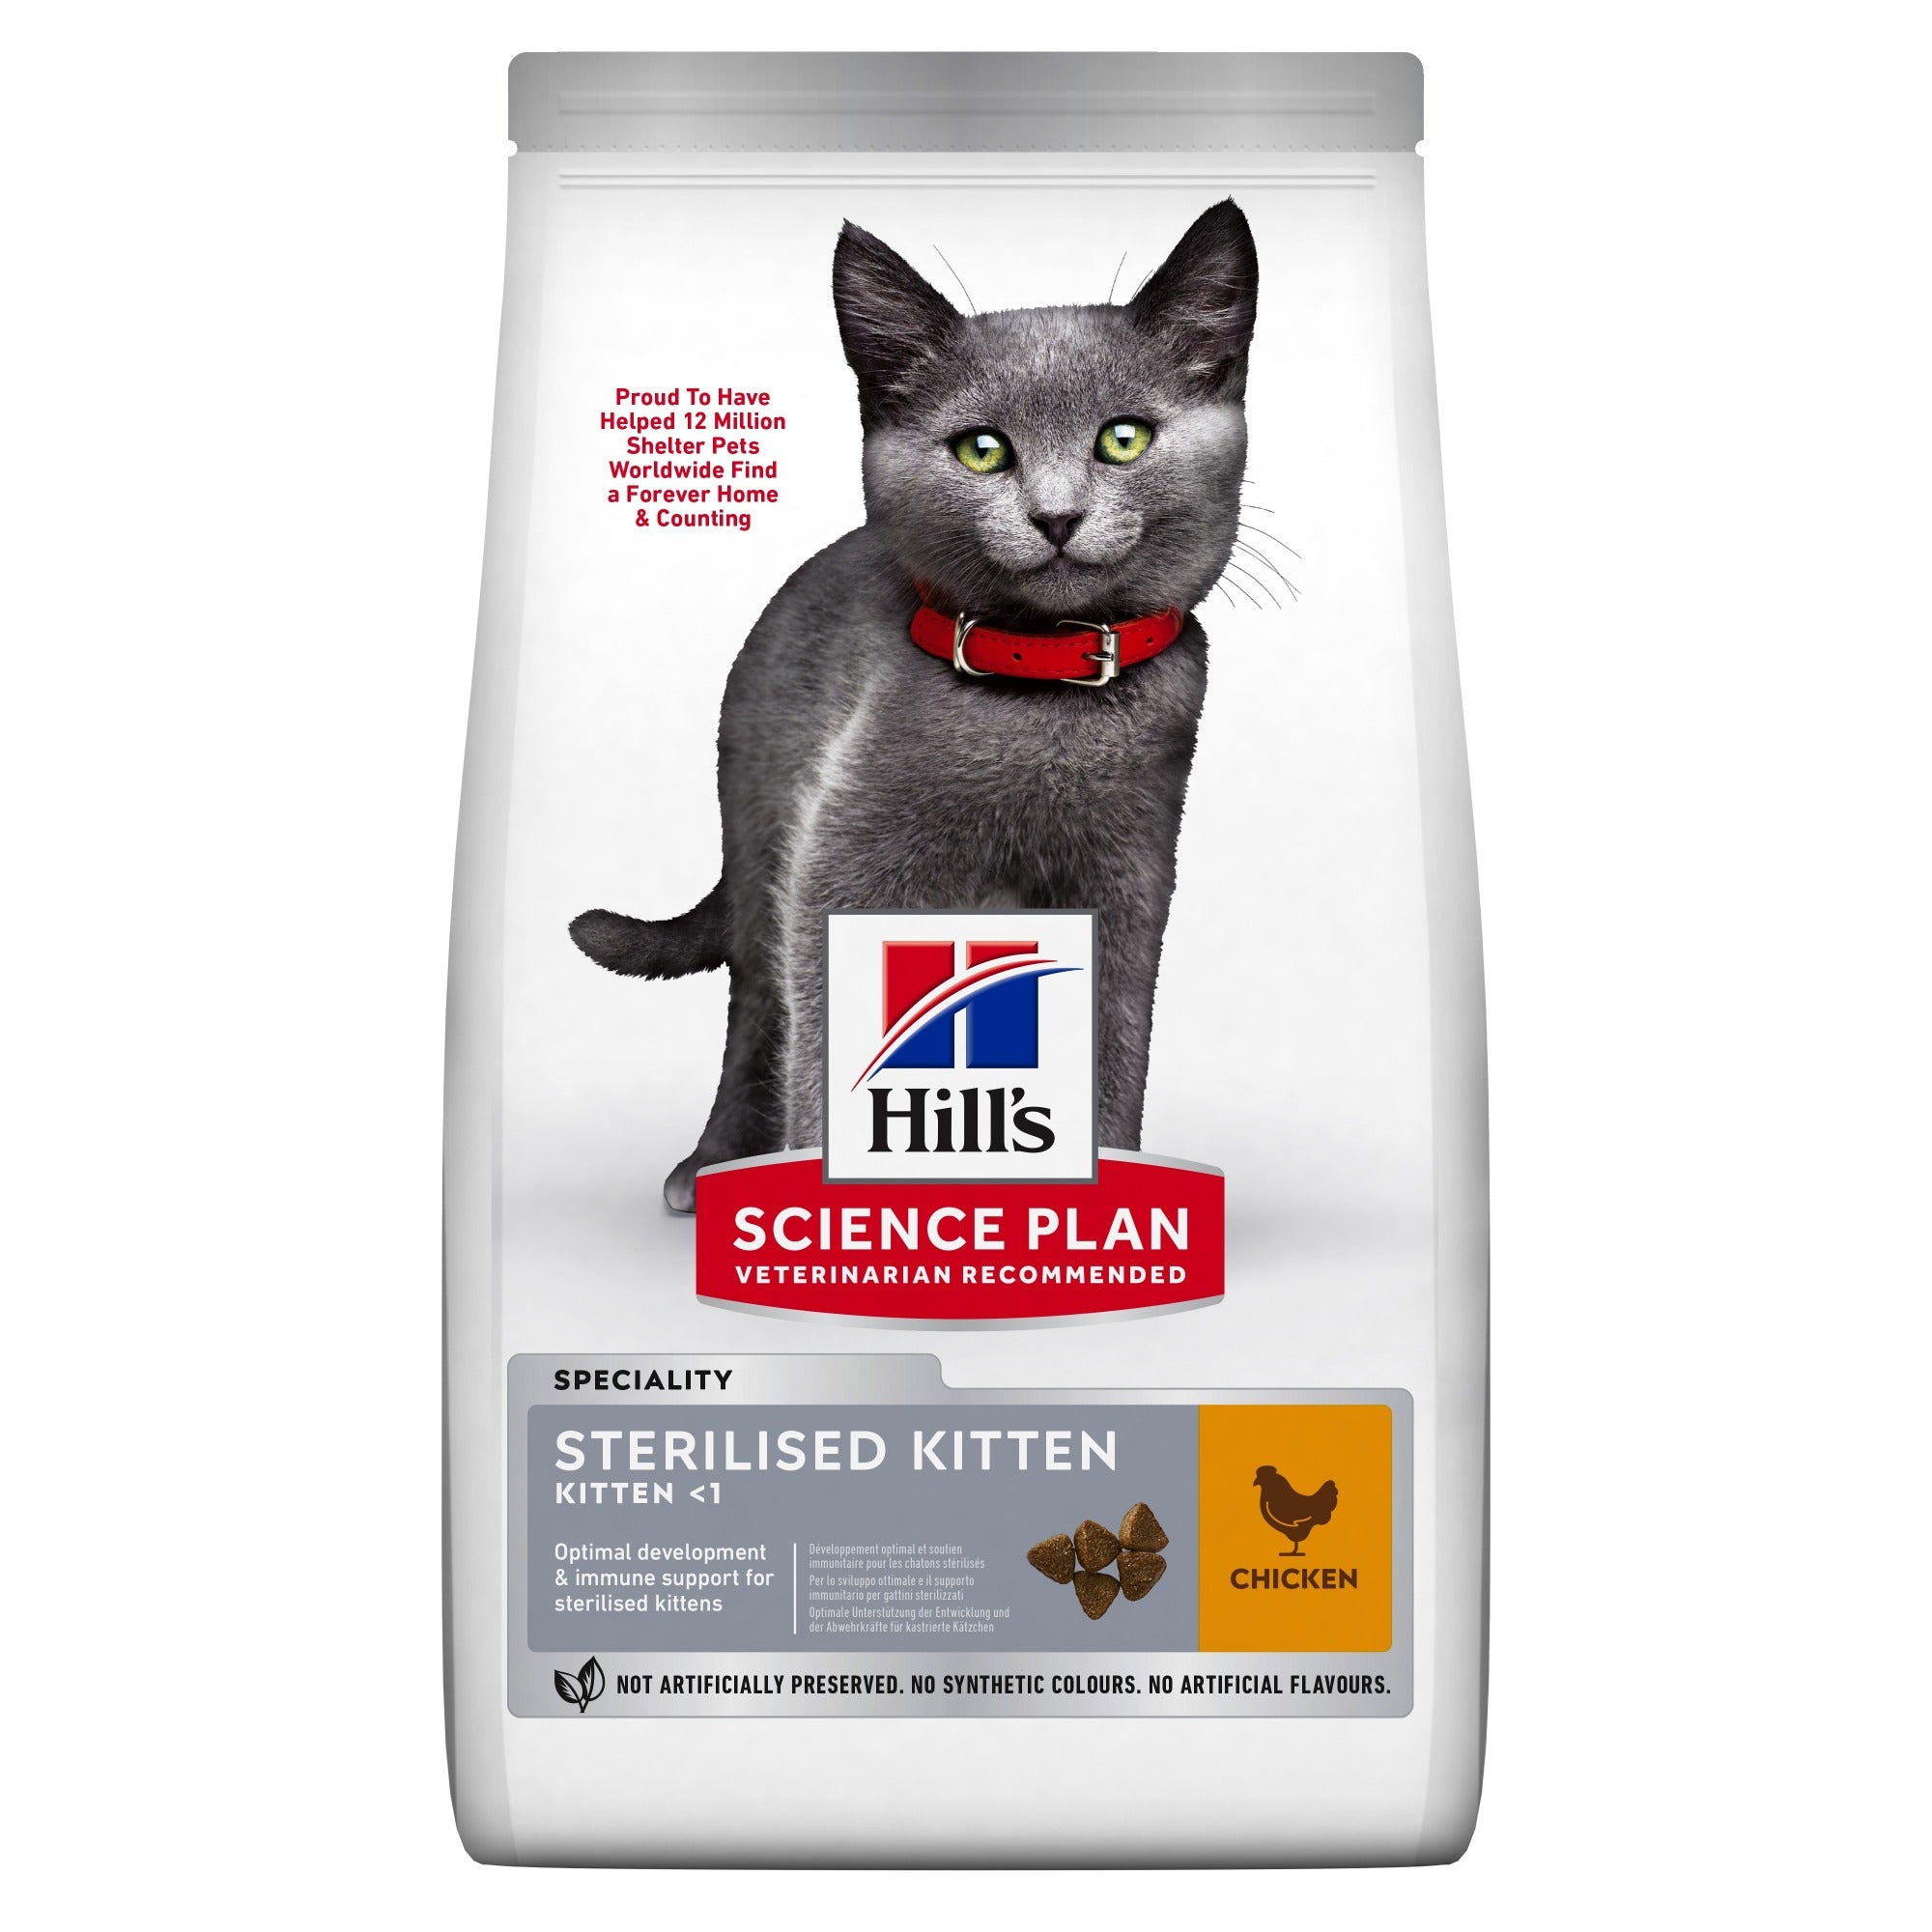 Hill's Science Plan Sterilised Kitten Food with Chicken